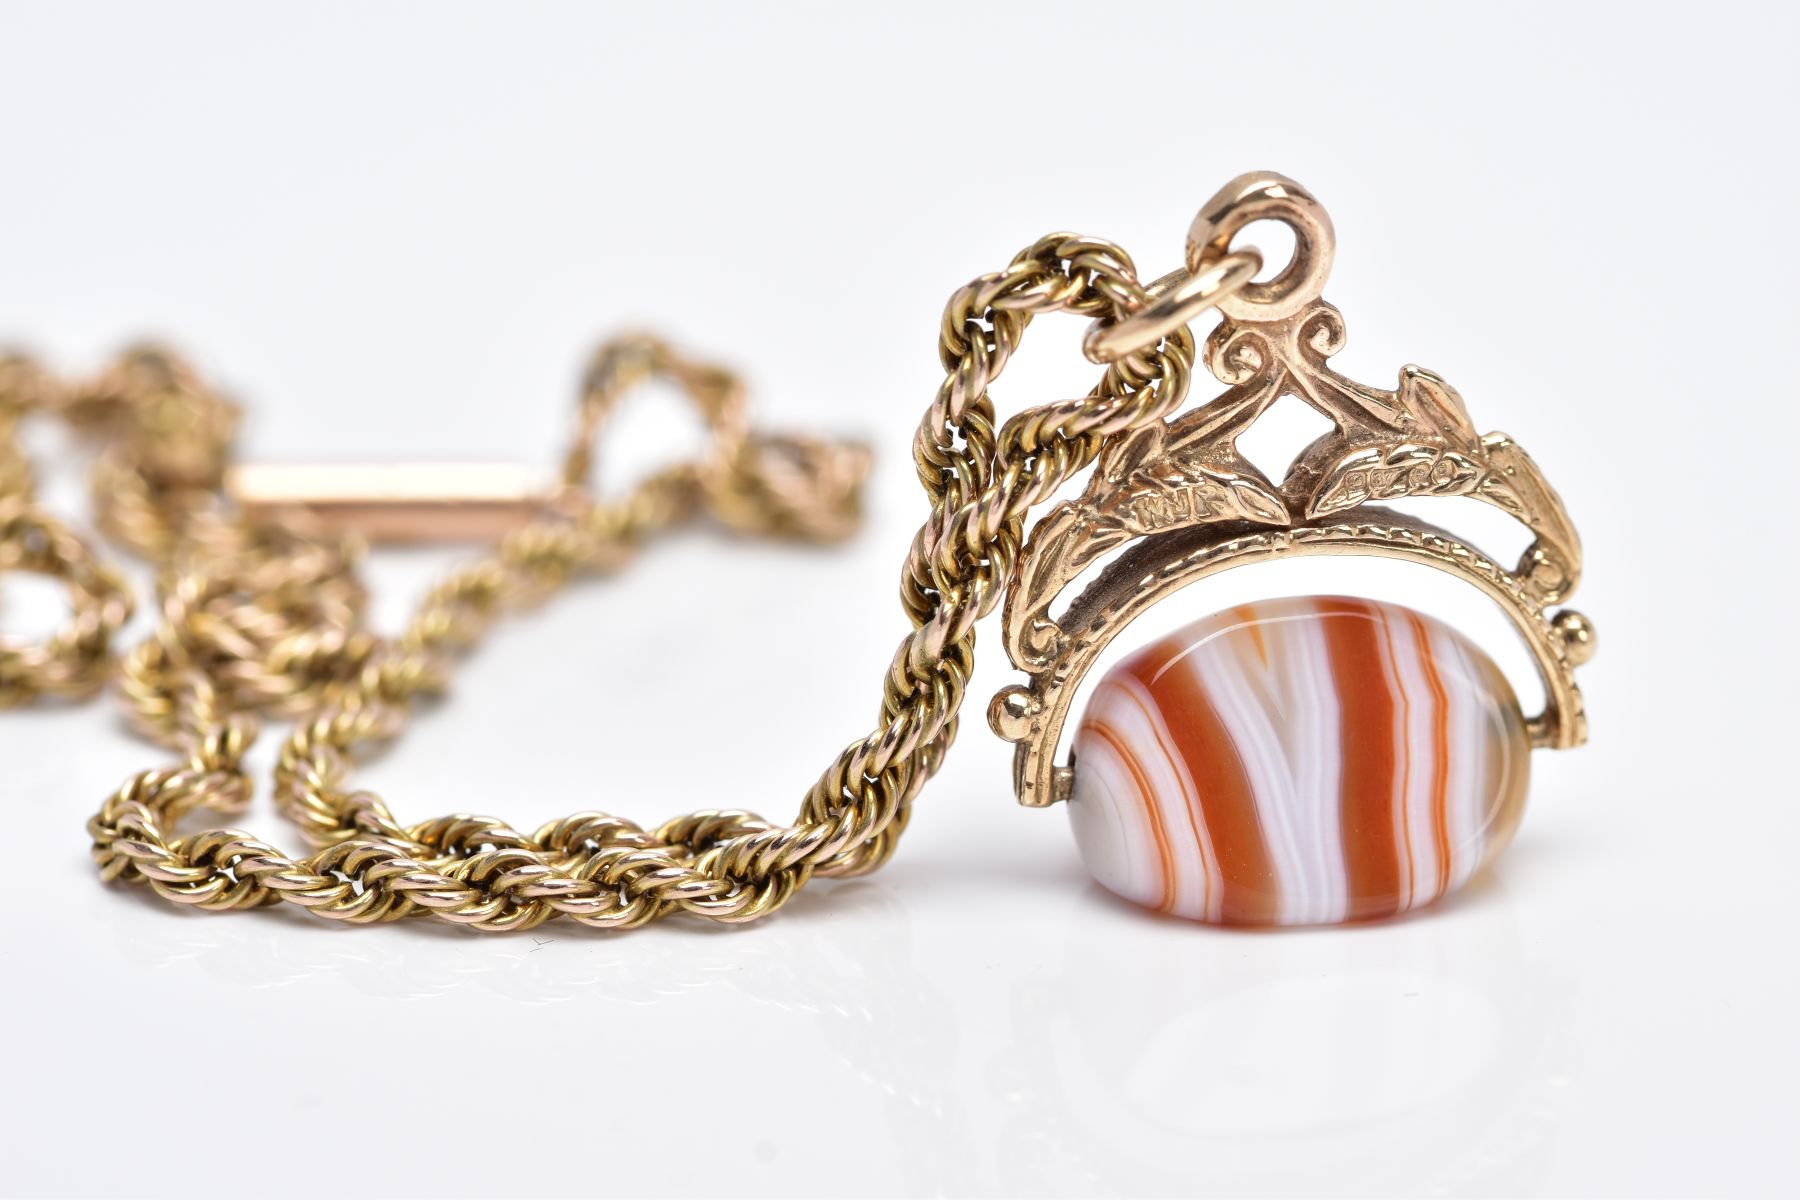 A 9CT GOLD SWIVEL AGATE FOB PENDANT NECKLACE, the fob designed with a polished white and orange